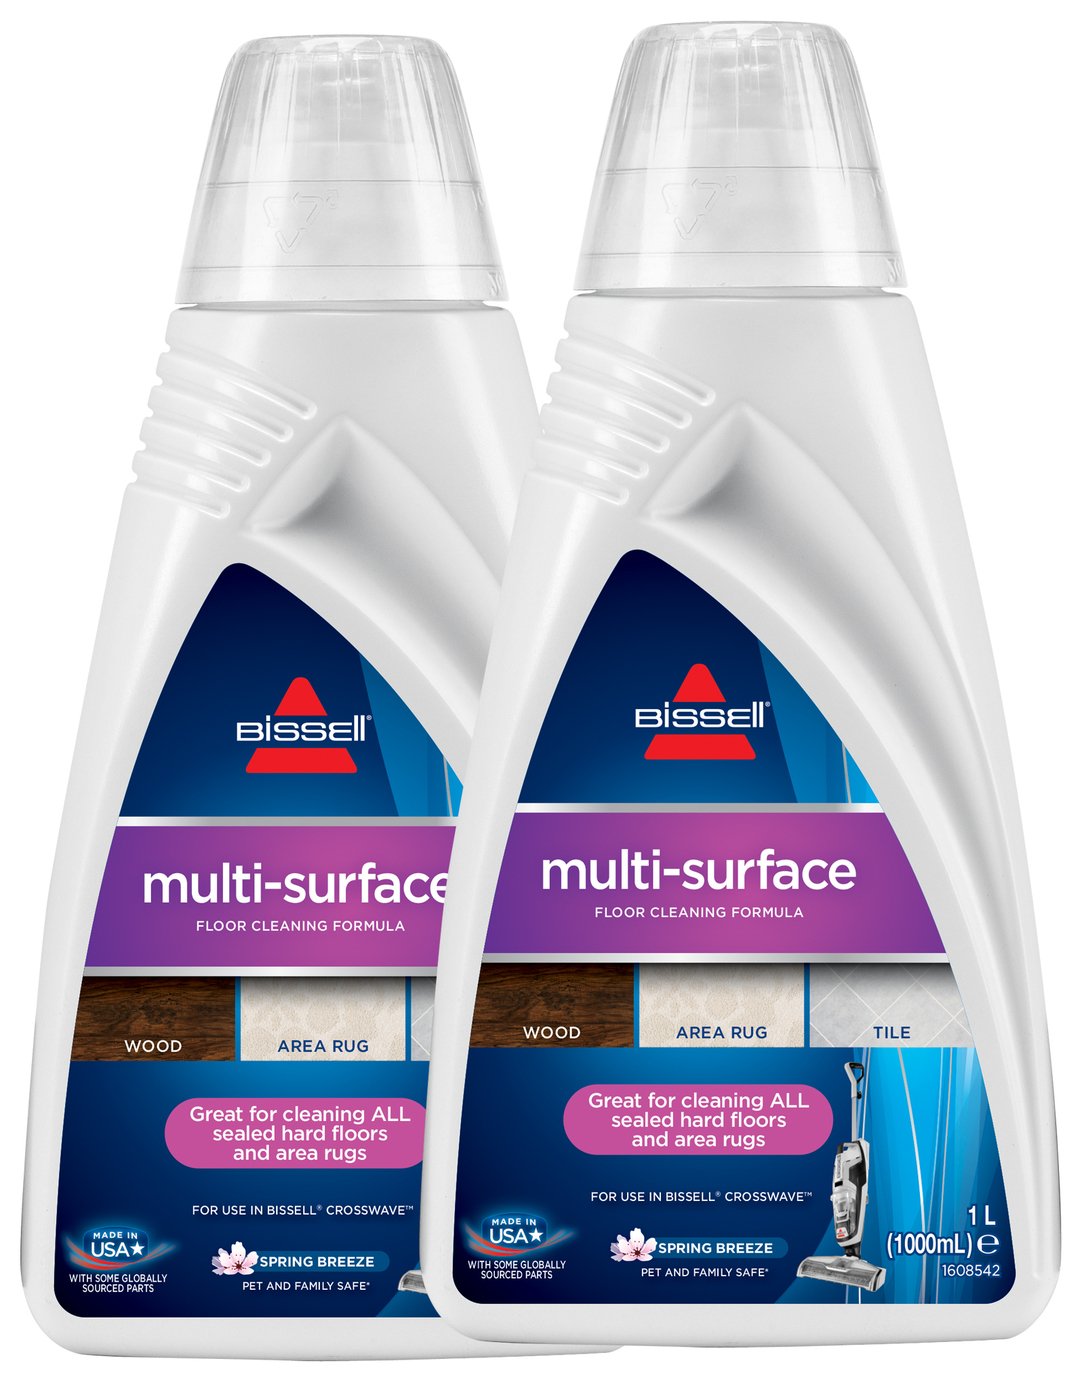 Bissell CrossWave 1L Surface Cleaning Solution Review